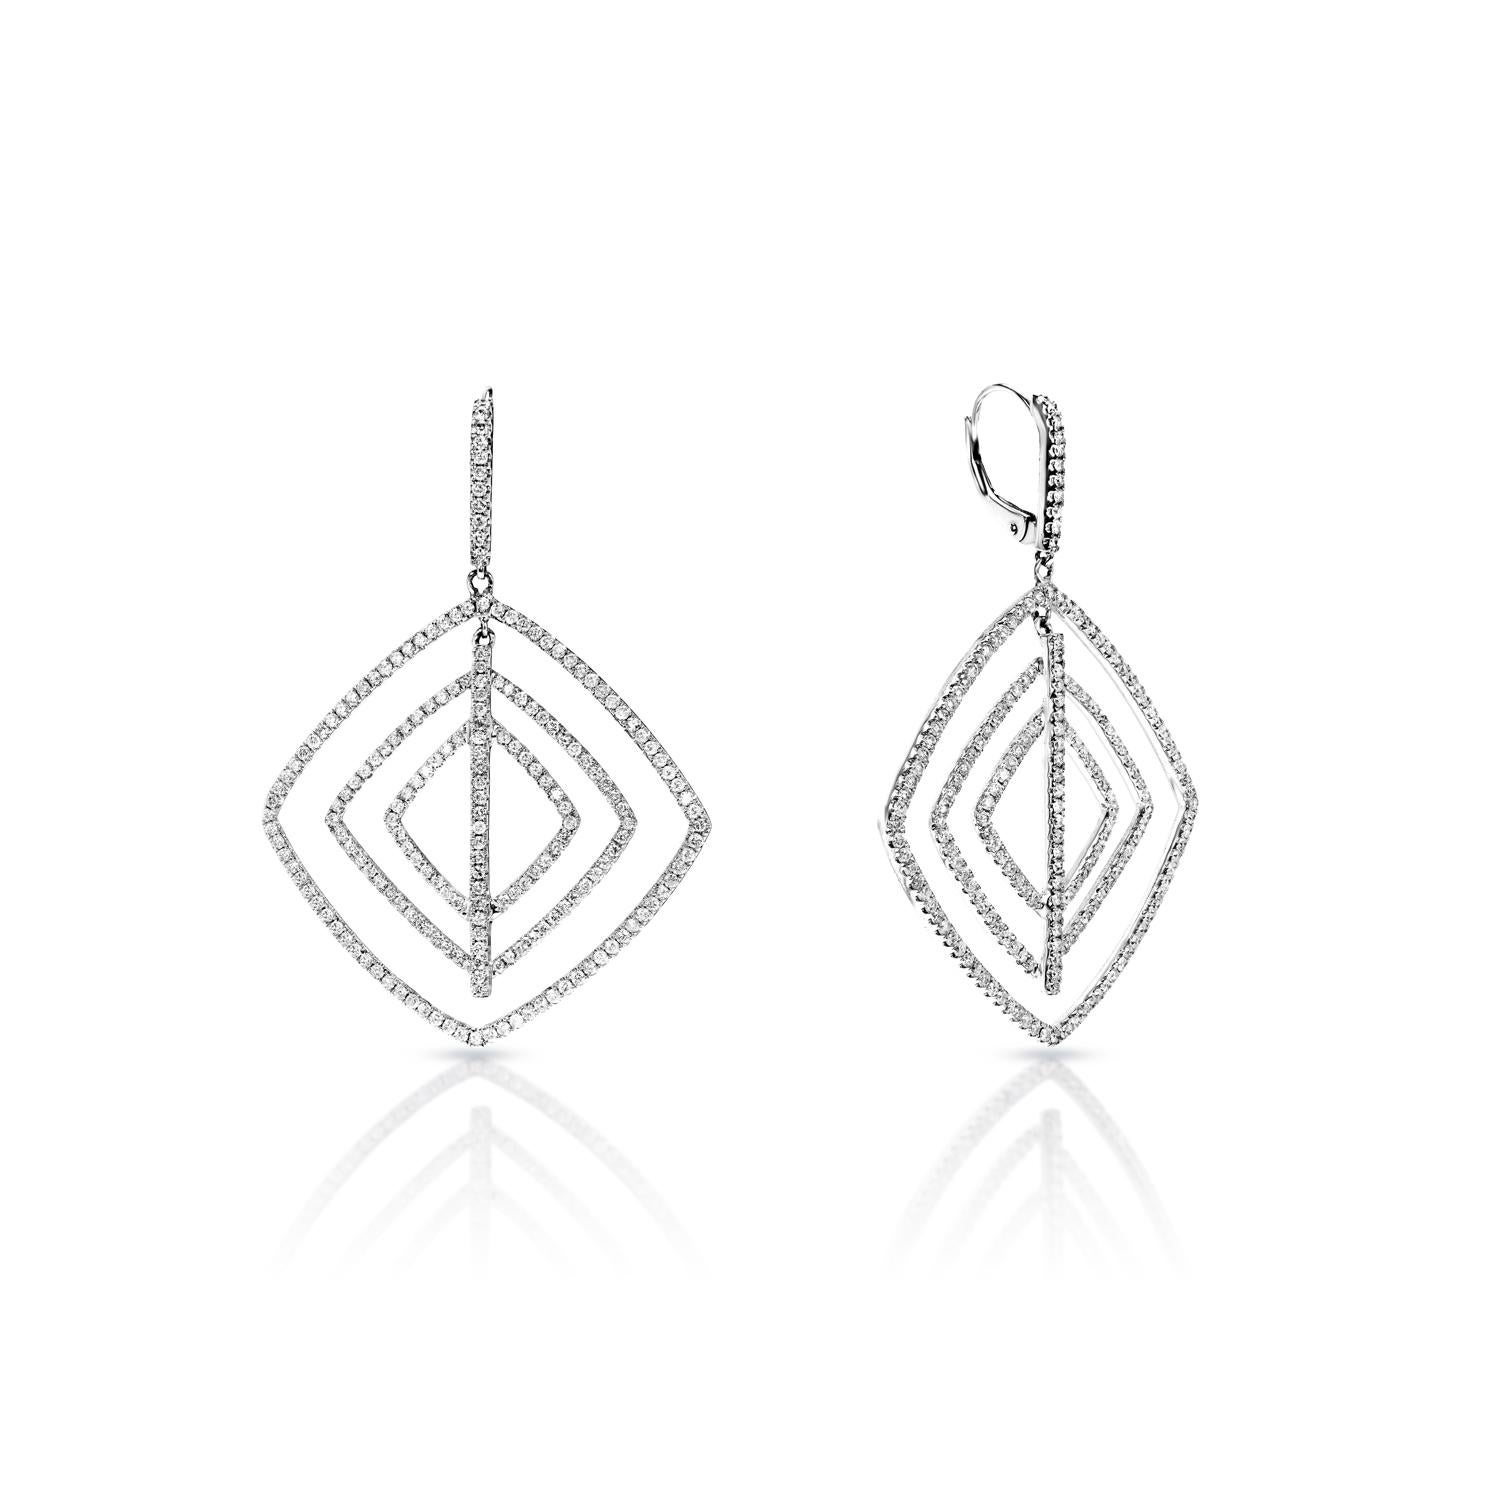 Round Cut 3 Carat Round Brilliant Diamond Hanging Earrings Certified For Sale